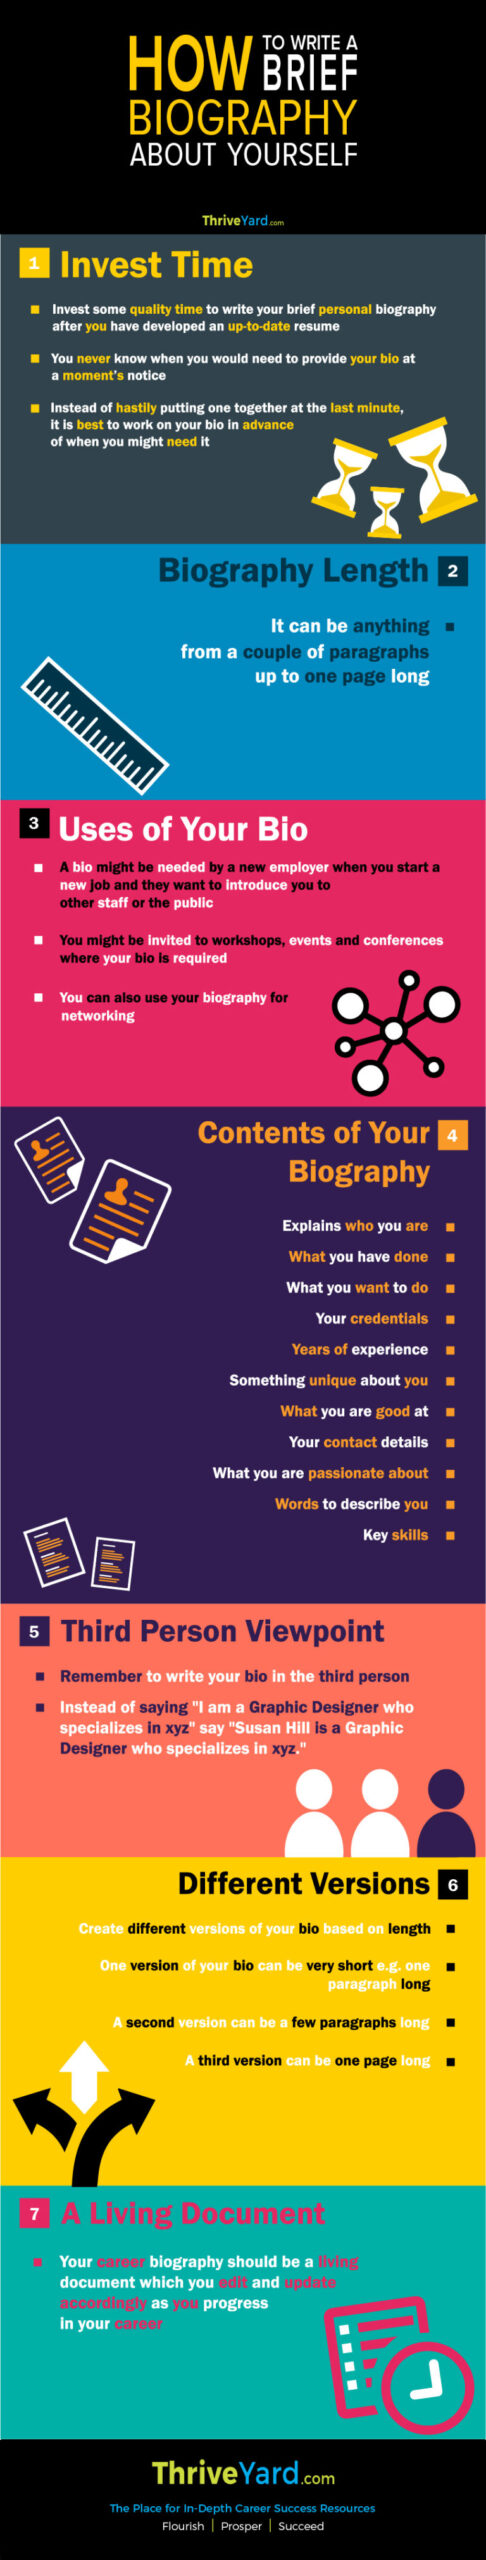 Biography - Templates by Canva